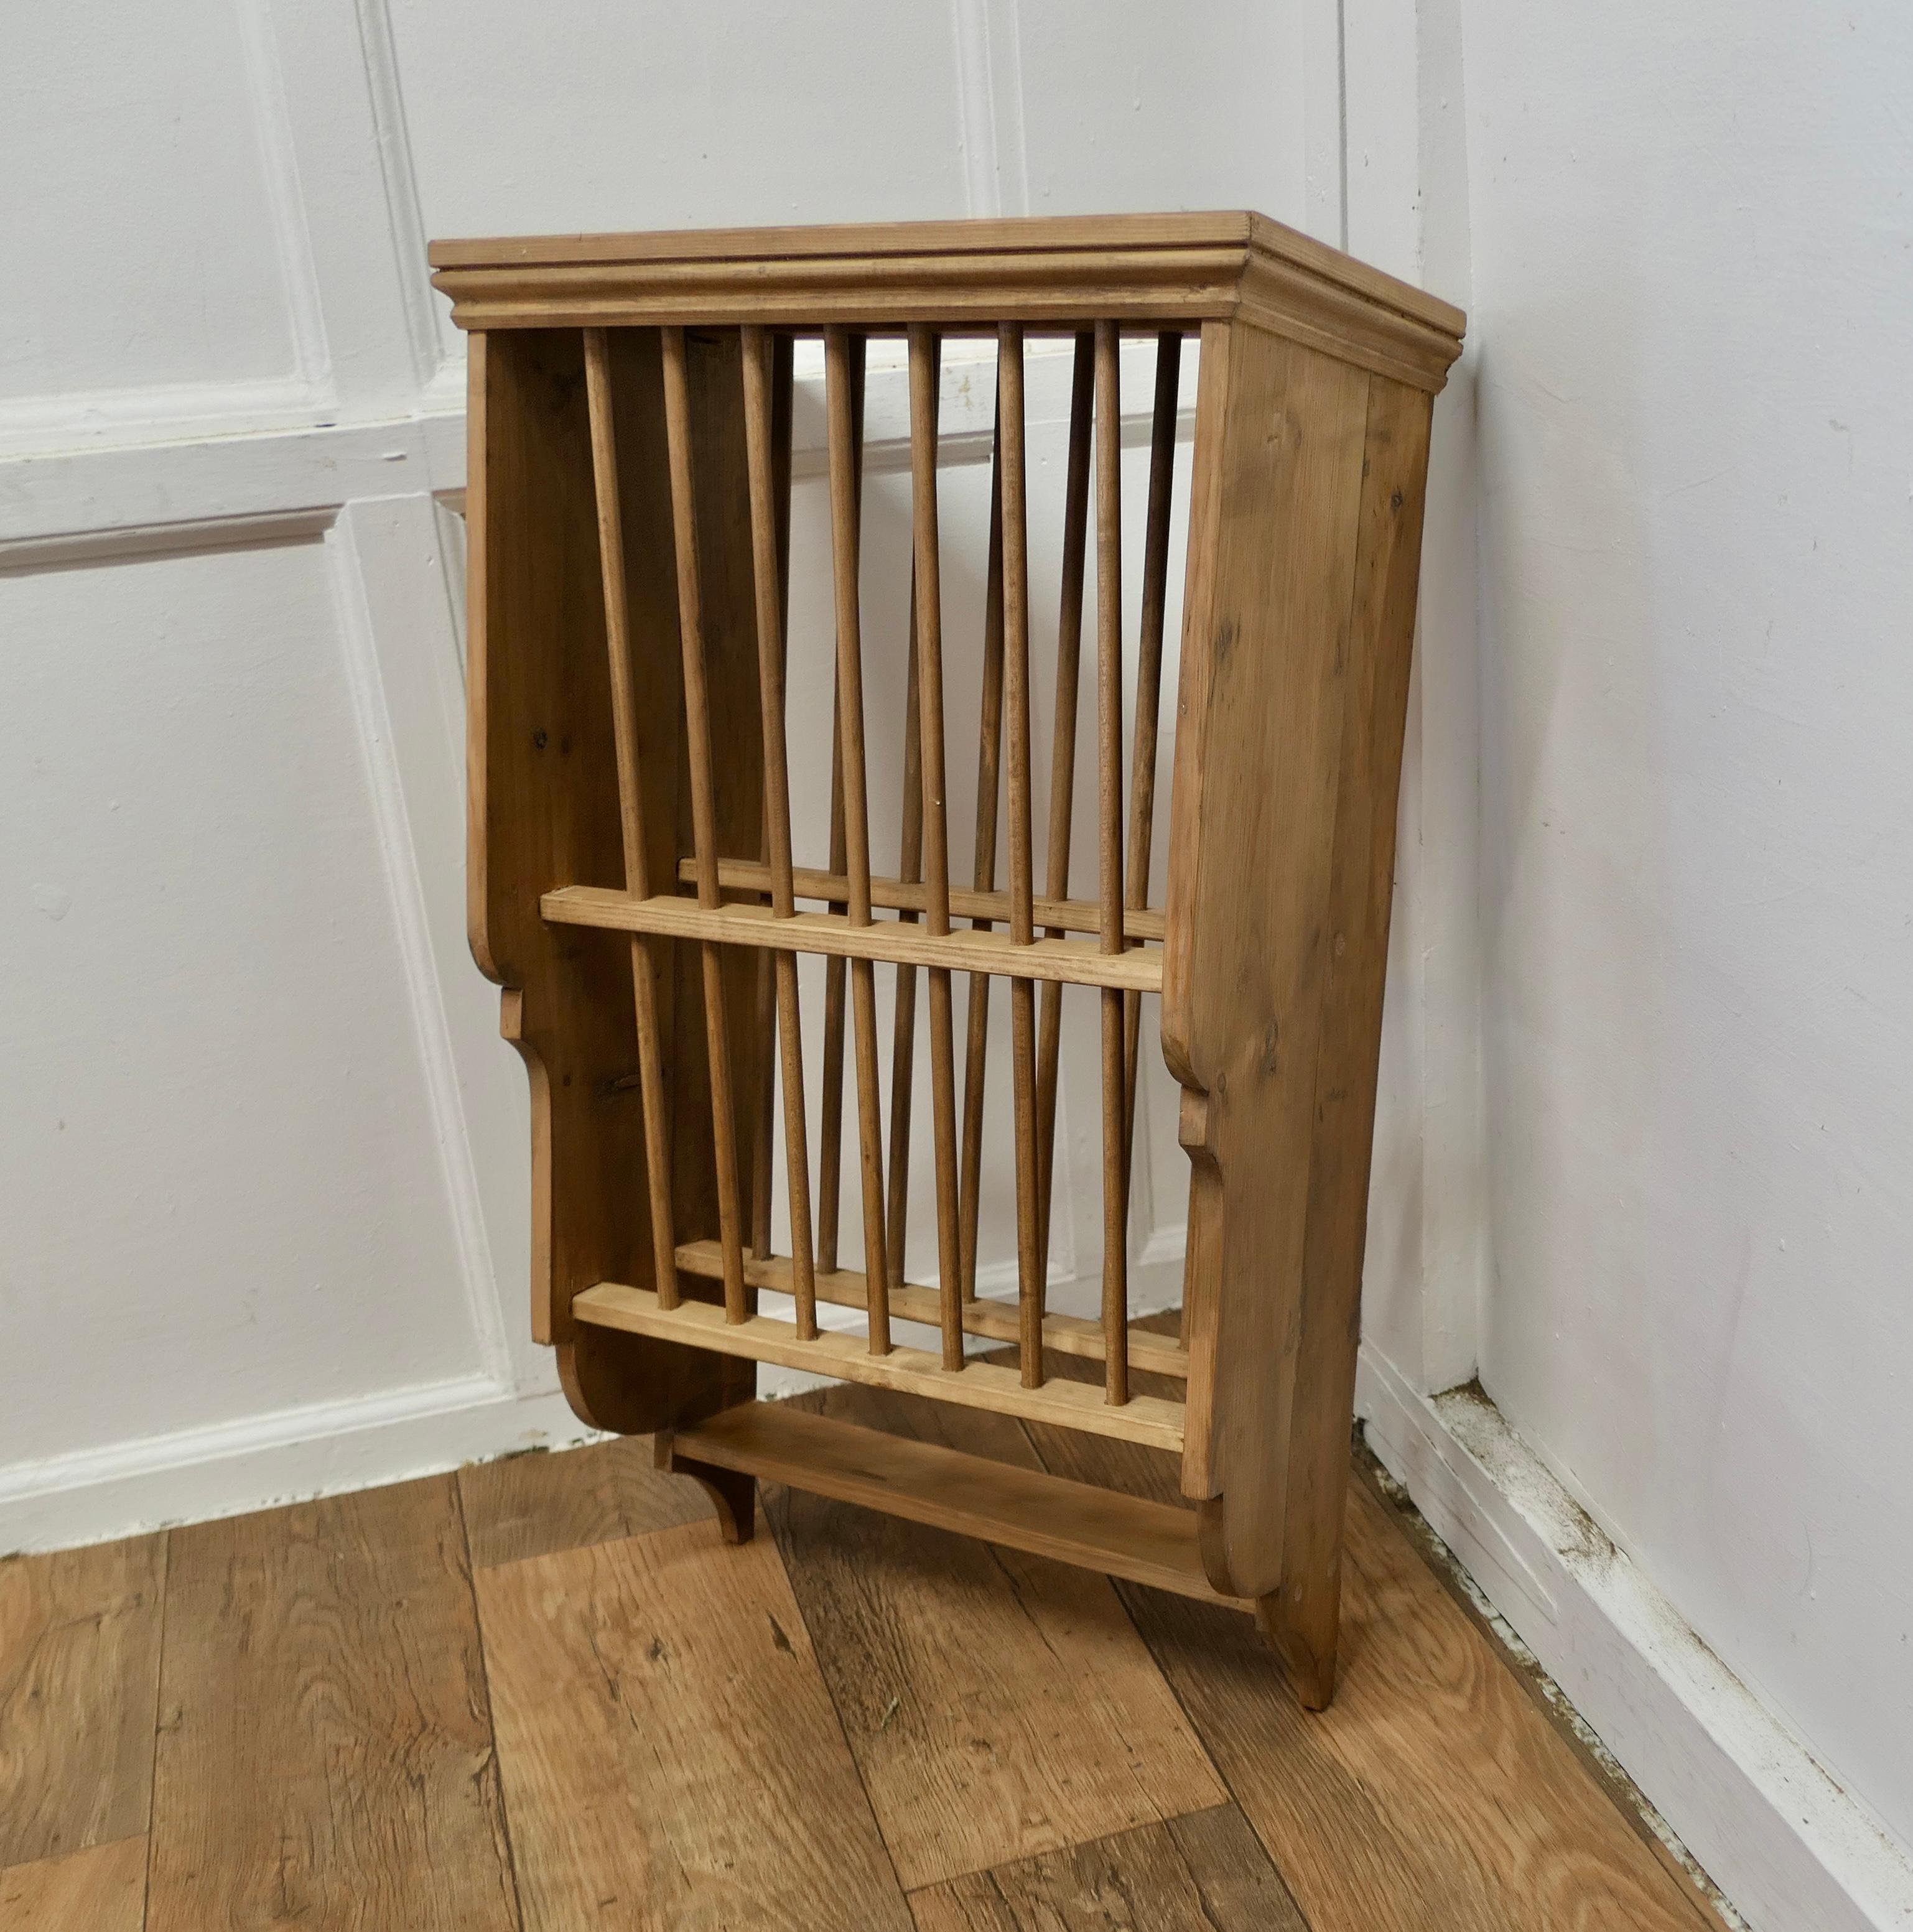 A Wall Hanging Pine Plate Rack


This useful piece hangs on the wall and drains and stores plates until required
It has a pine frame and wooden dowels with a waterfall shape, allowing 2 rows of plates to be stored at any one time, below there is a